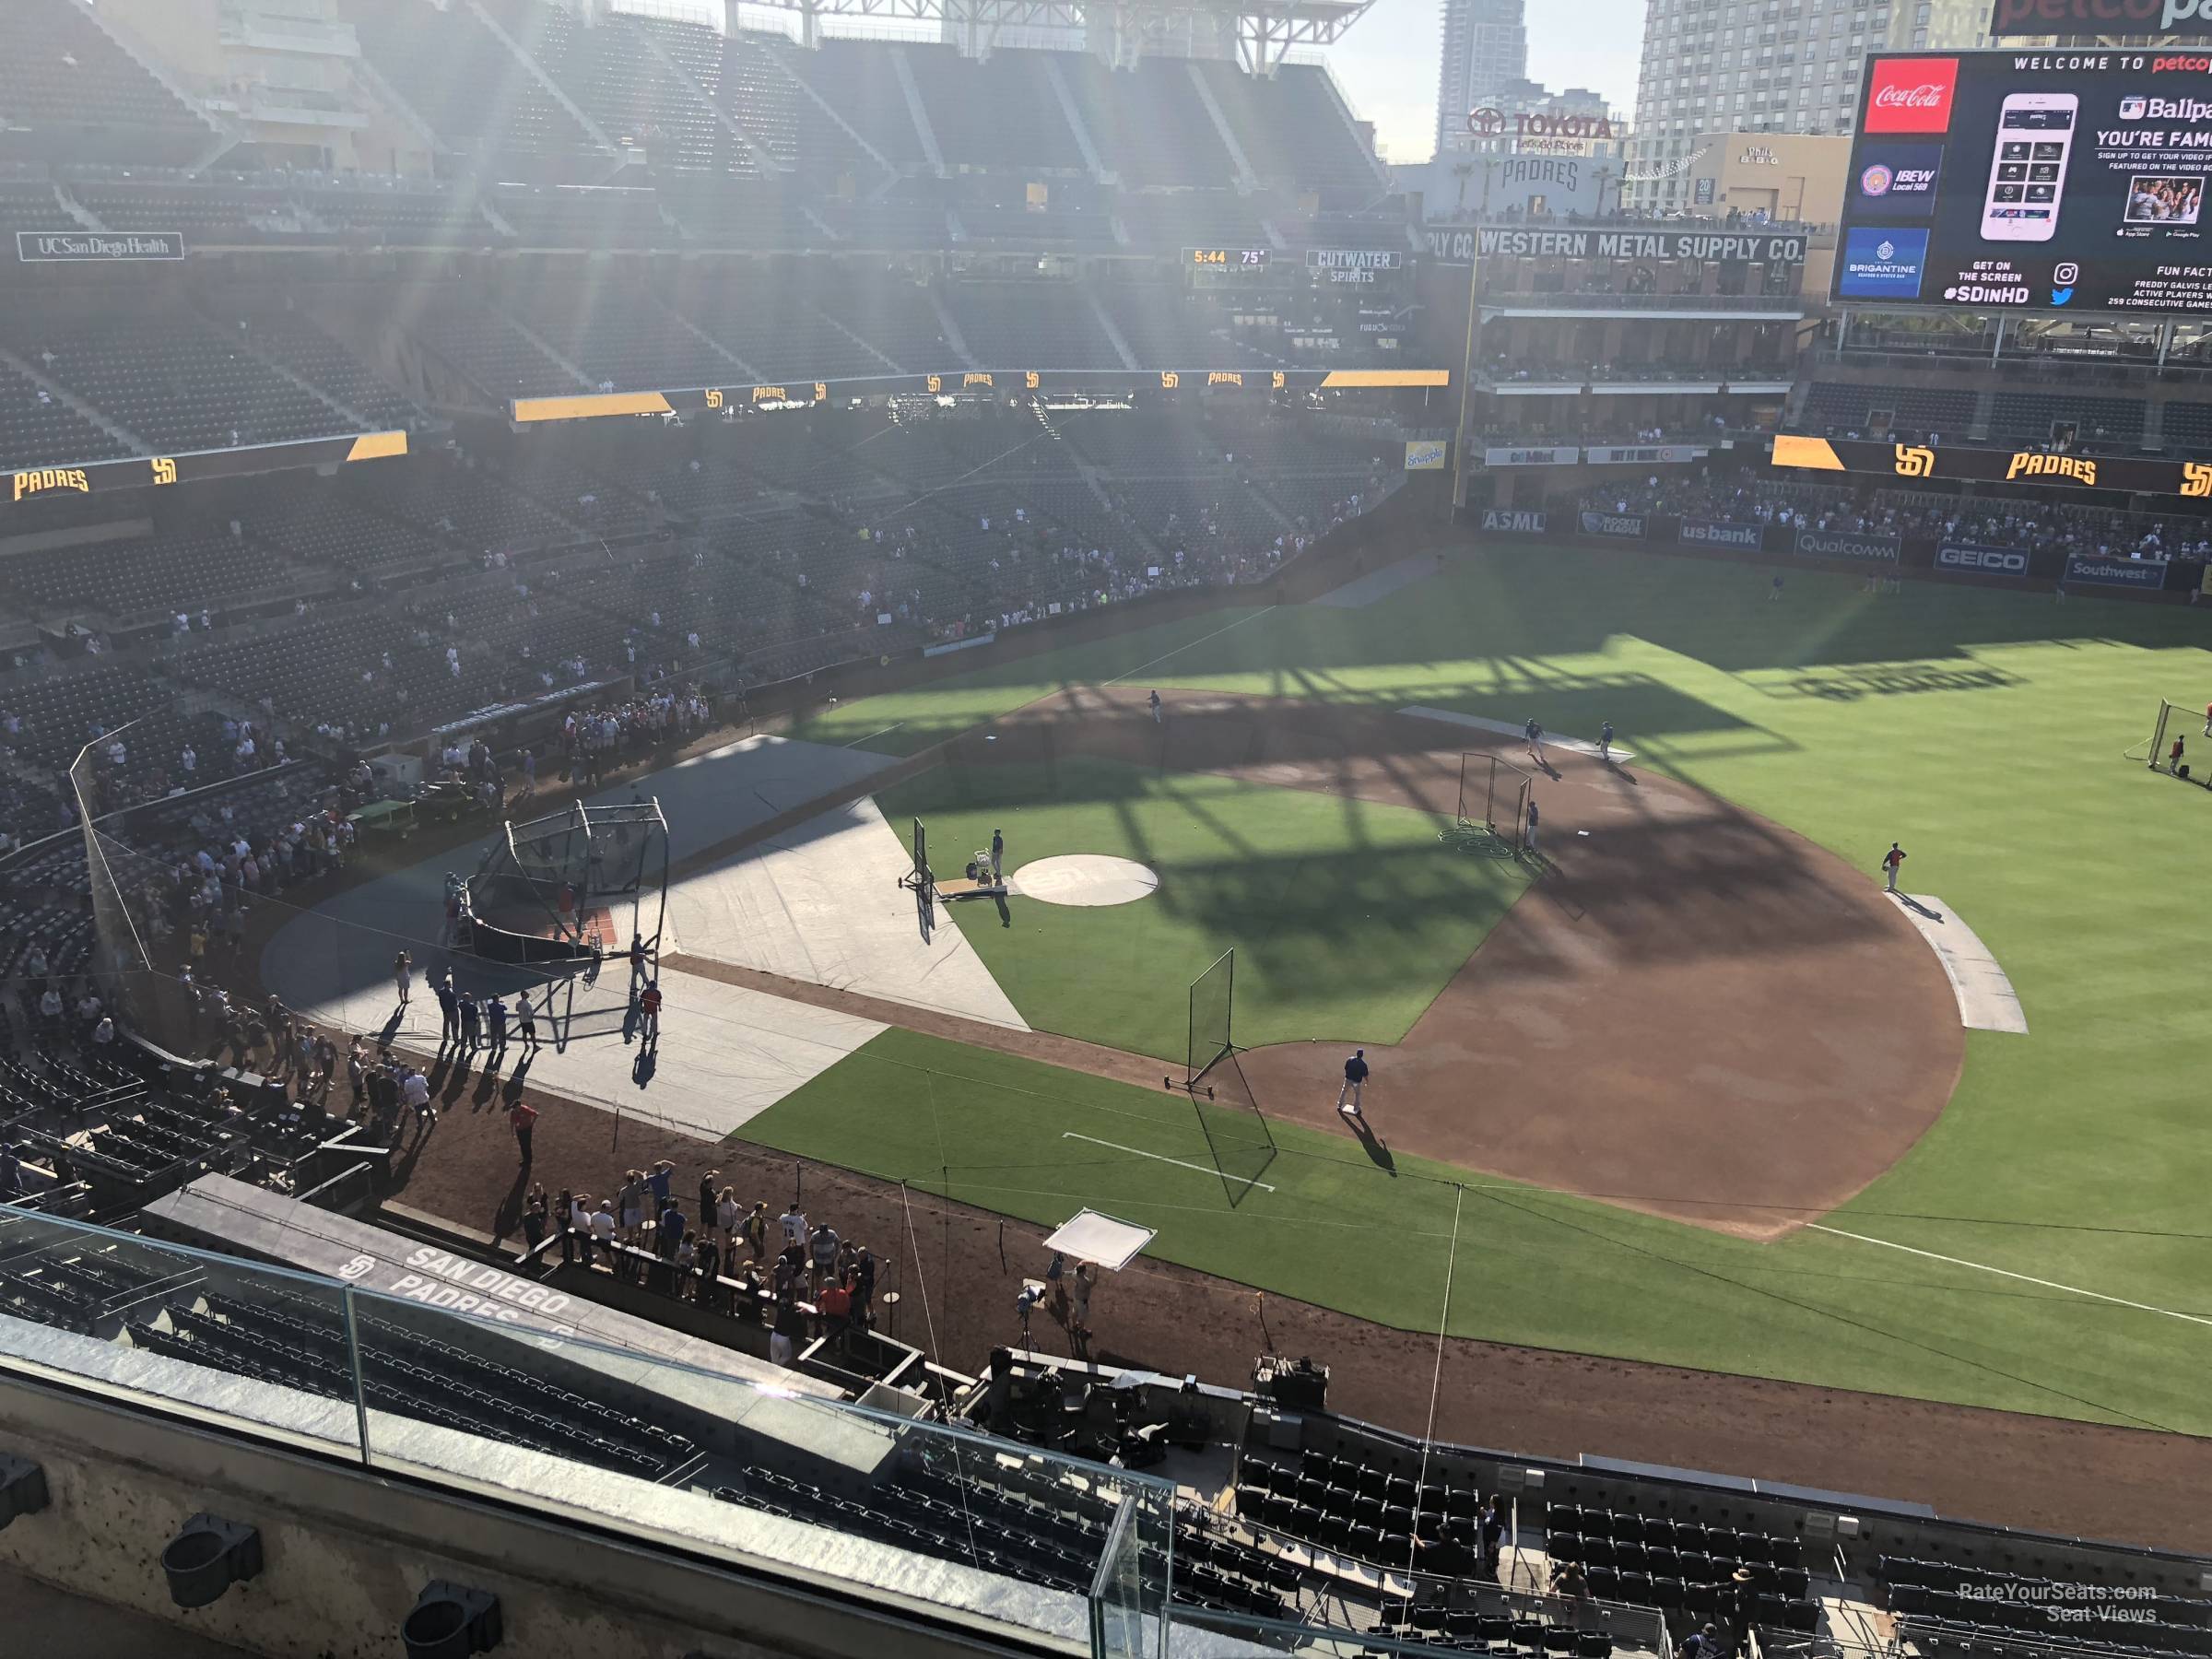 section 313, row 3 seat view  for baseball - petco park